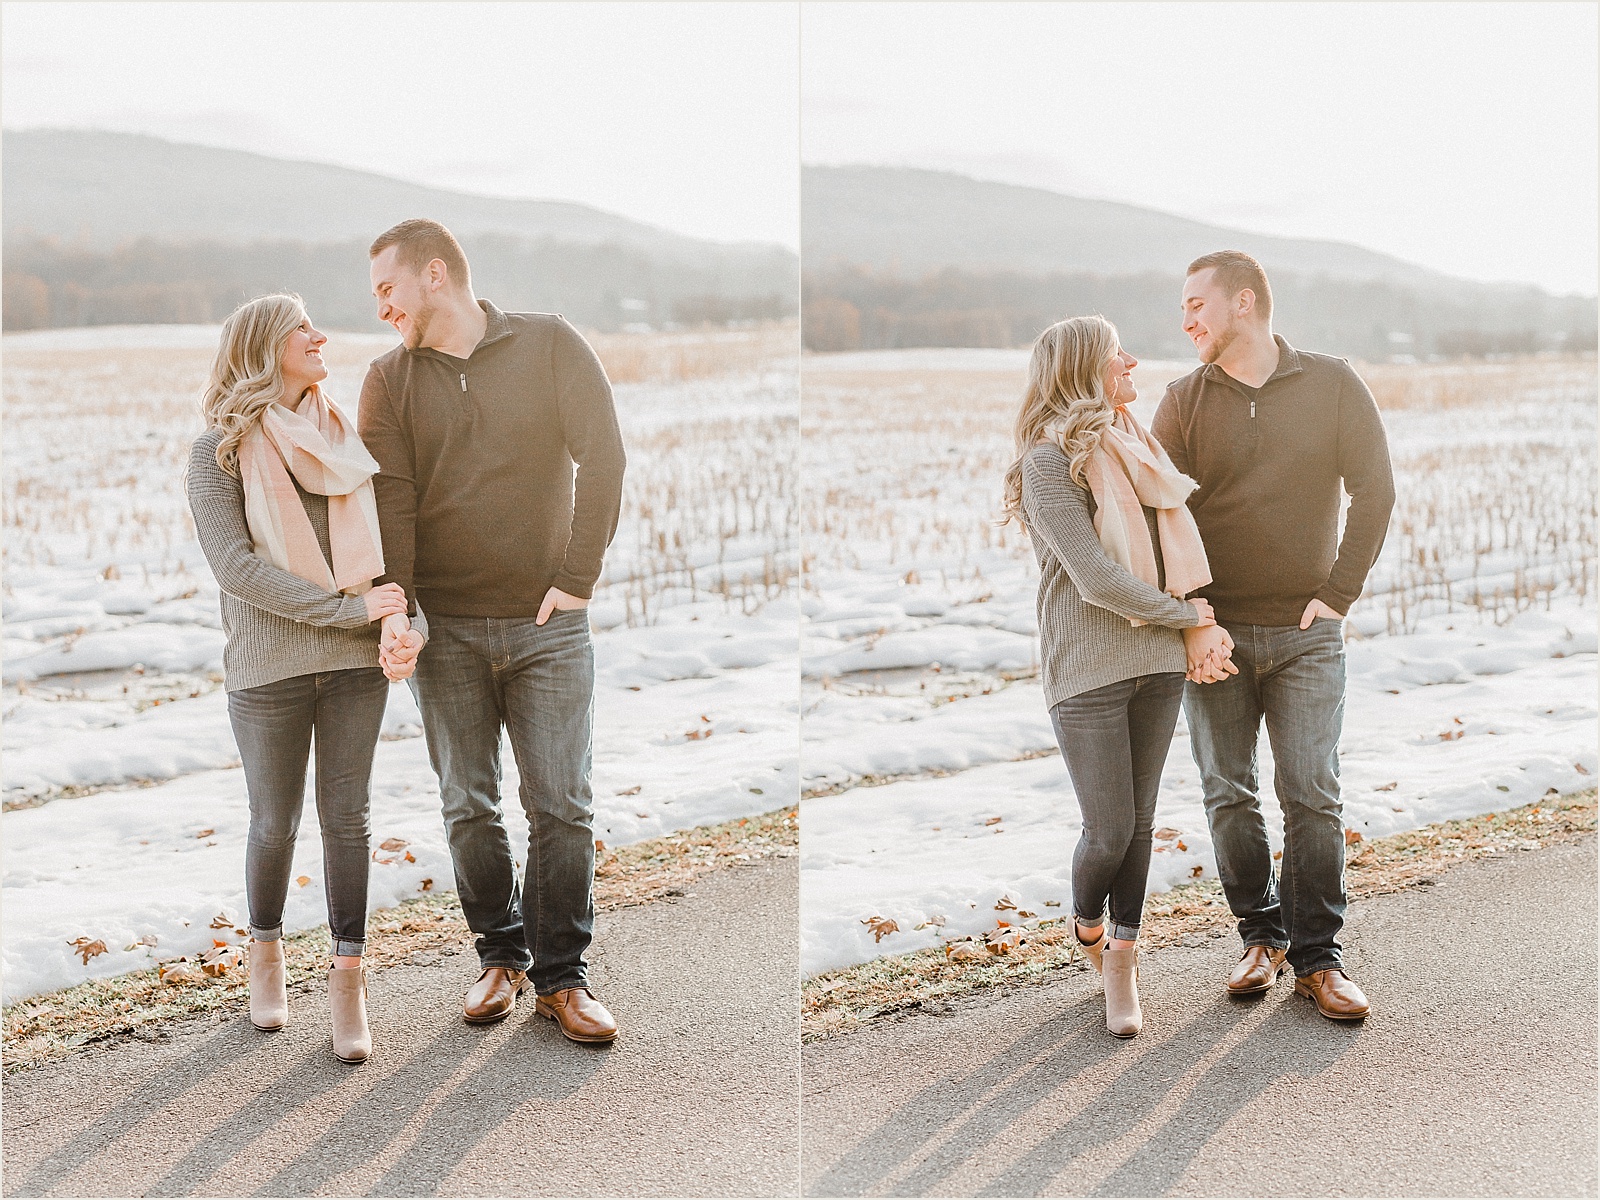 Central PA Engagement Photographer